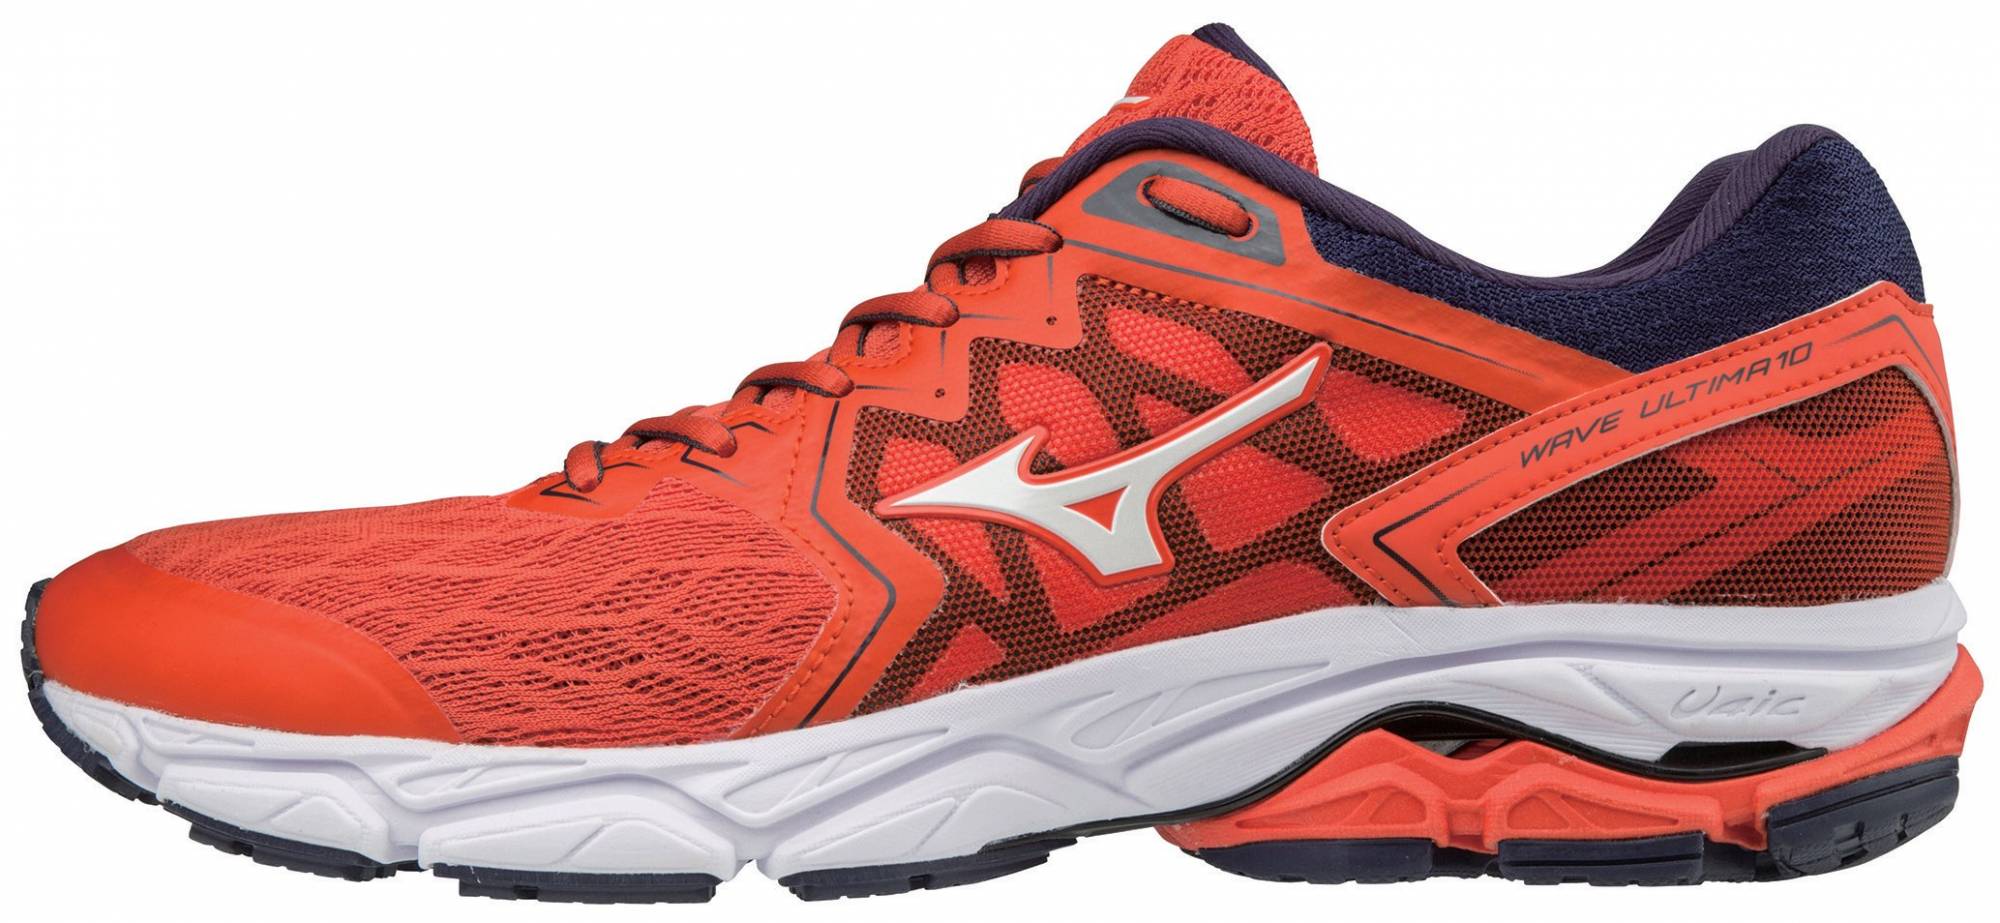 Only $89 + Review of Mizuno Wave Ultima 10 | RunRepeat